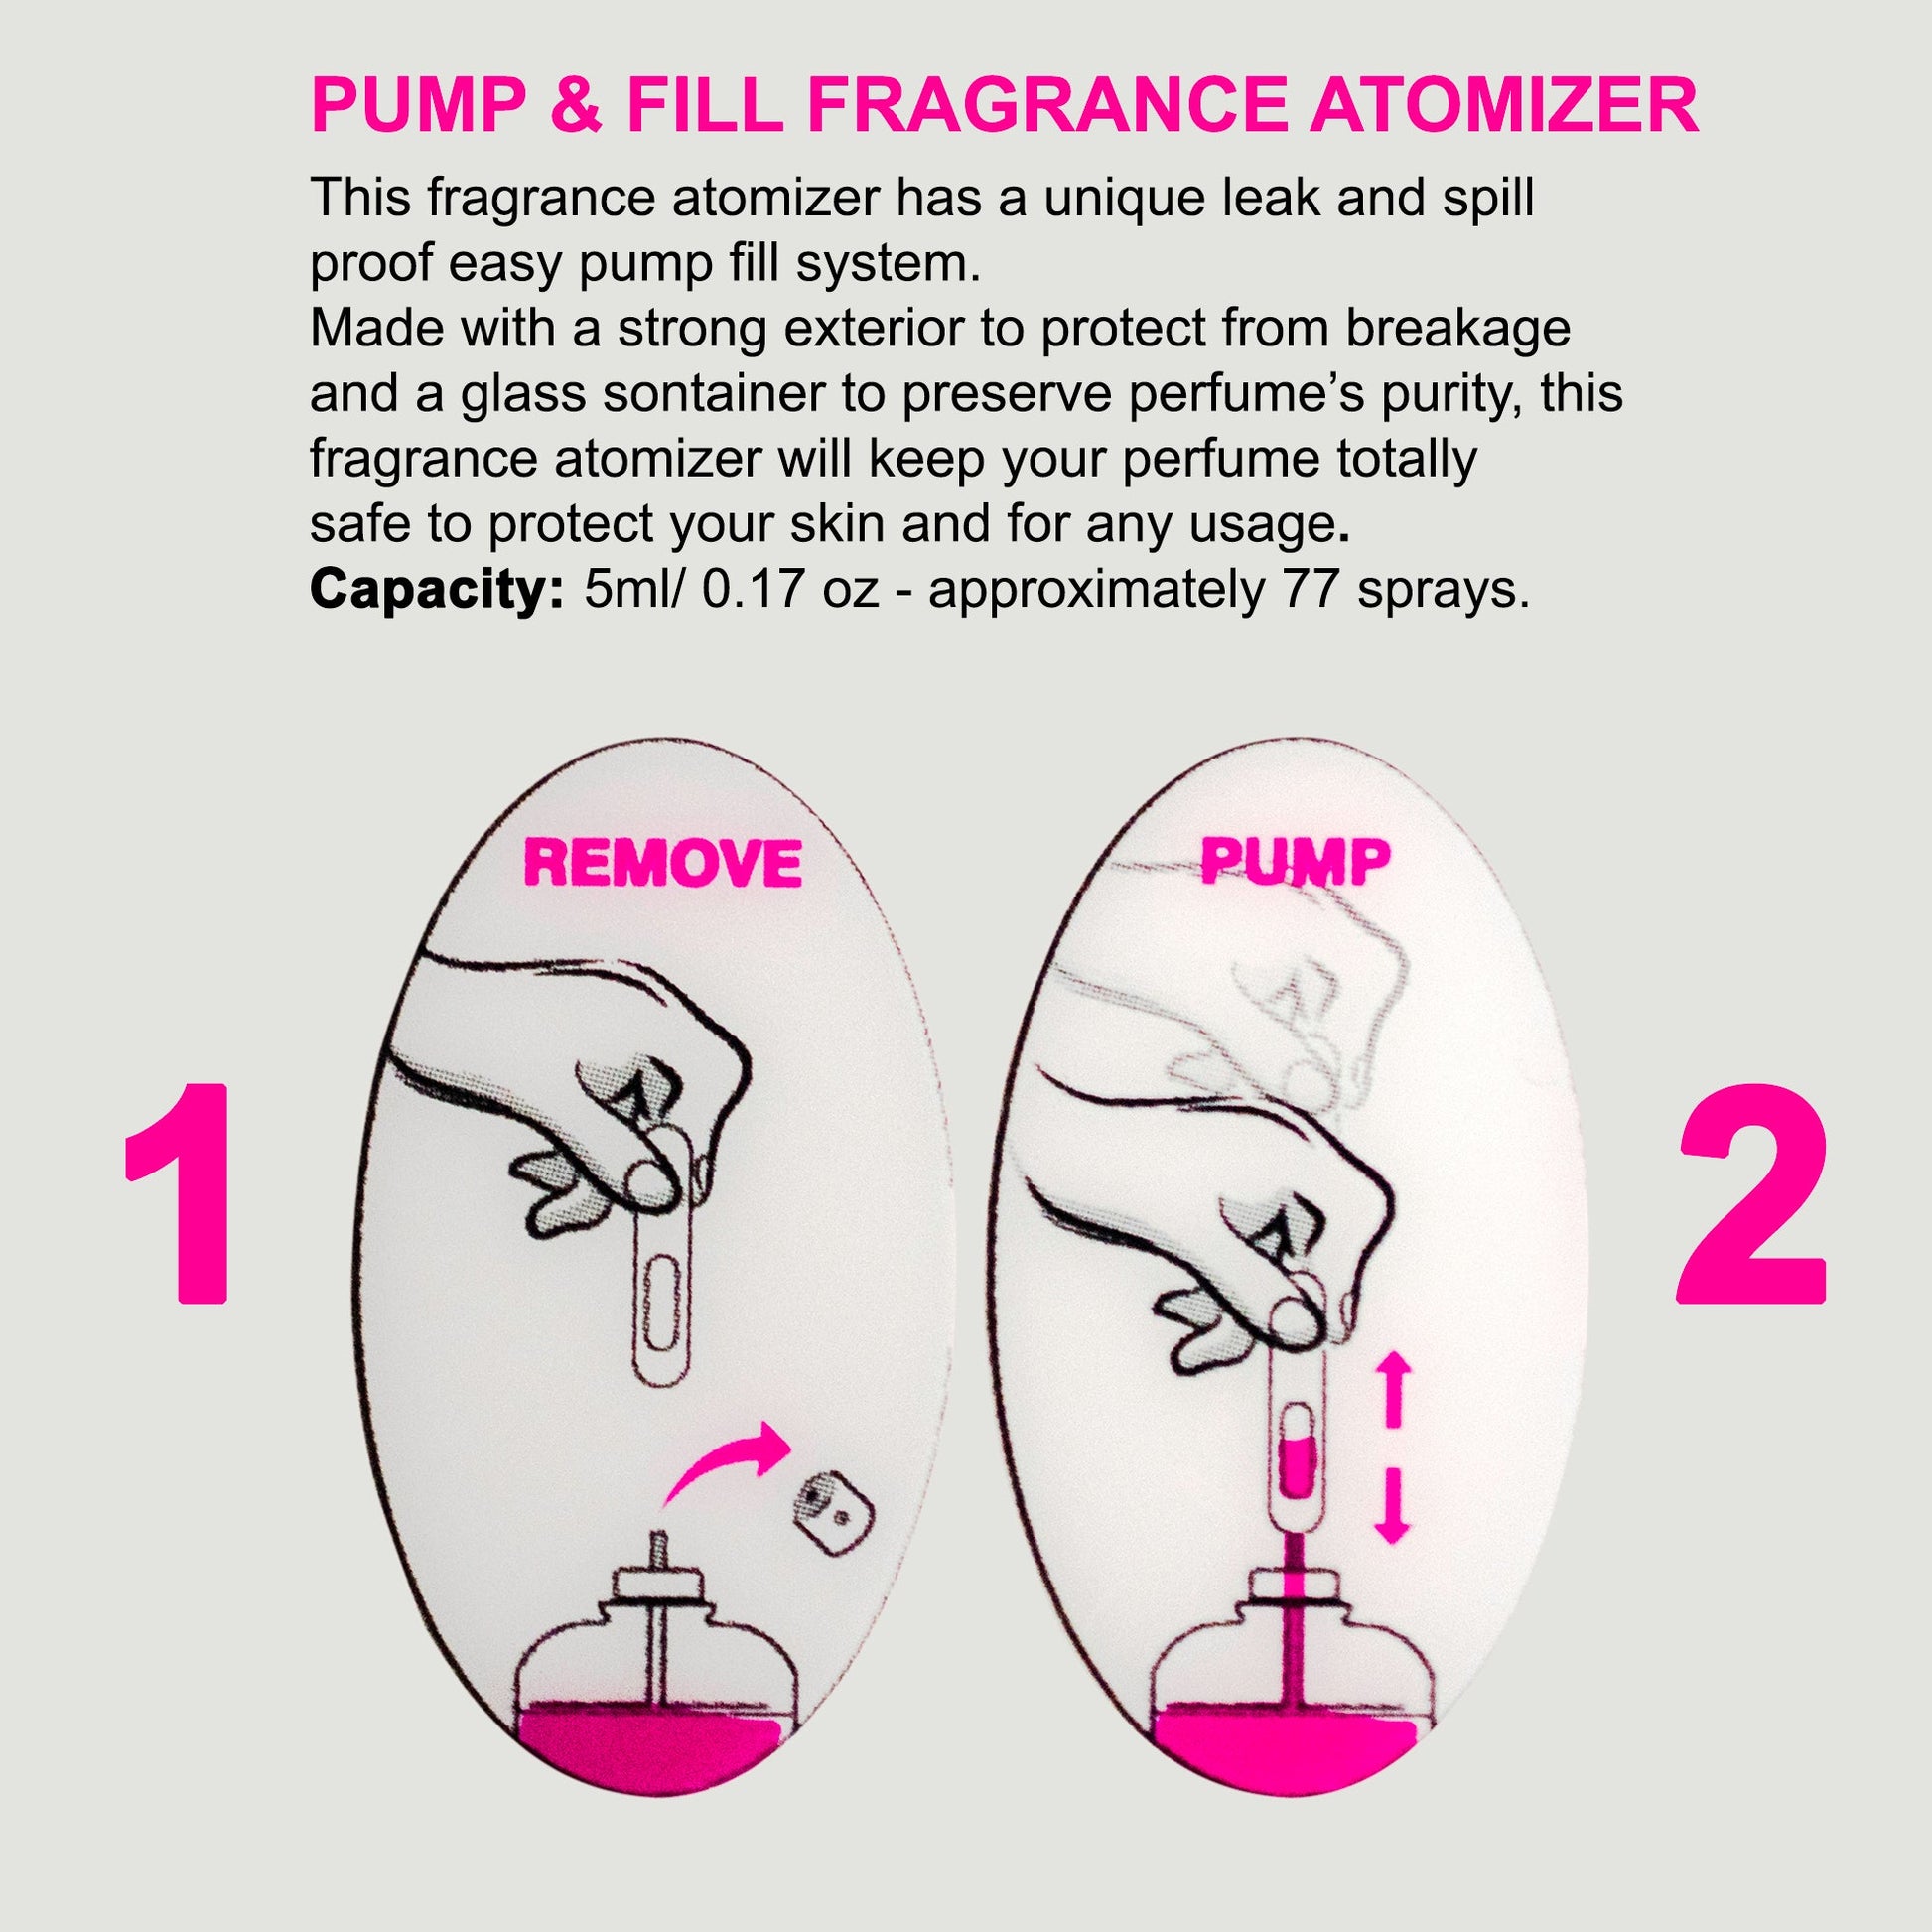 Pump and Fill Fragrance Atomizer by Flo, Product image 10